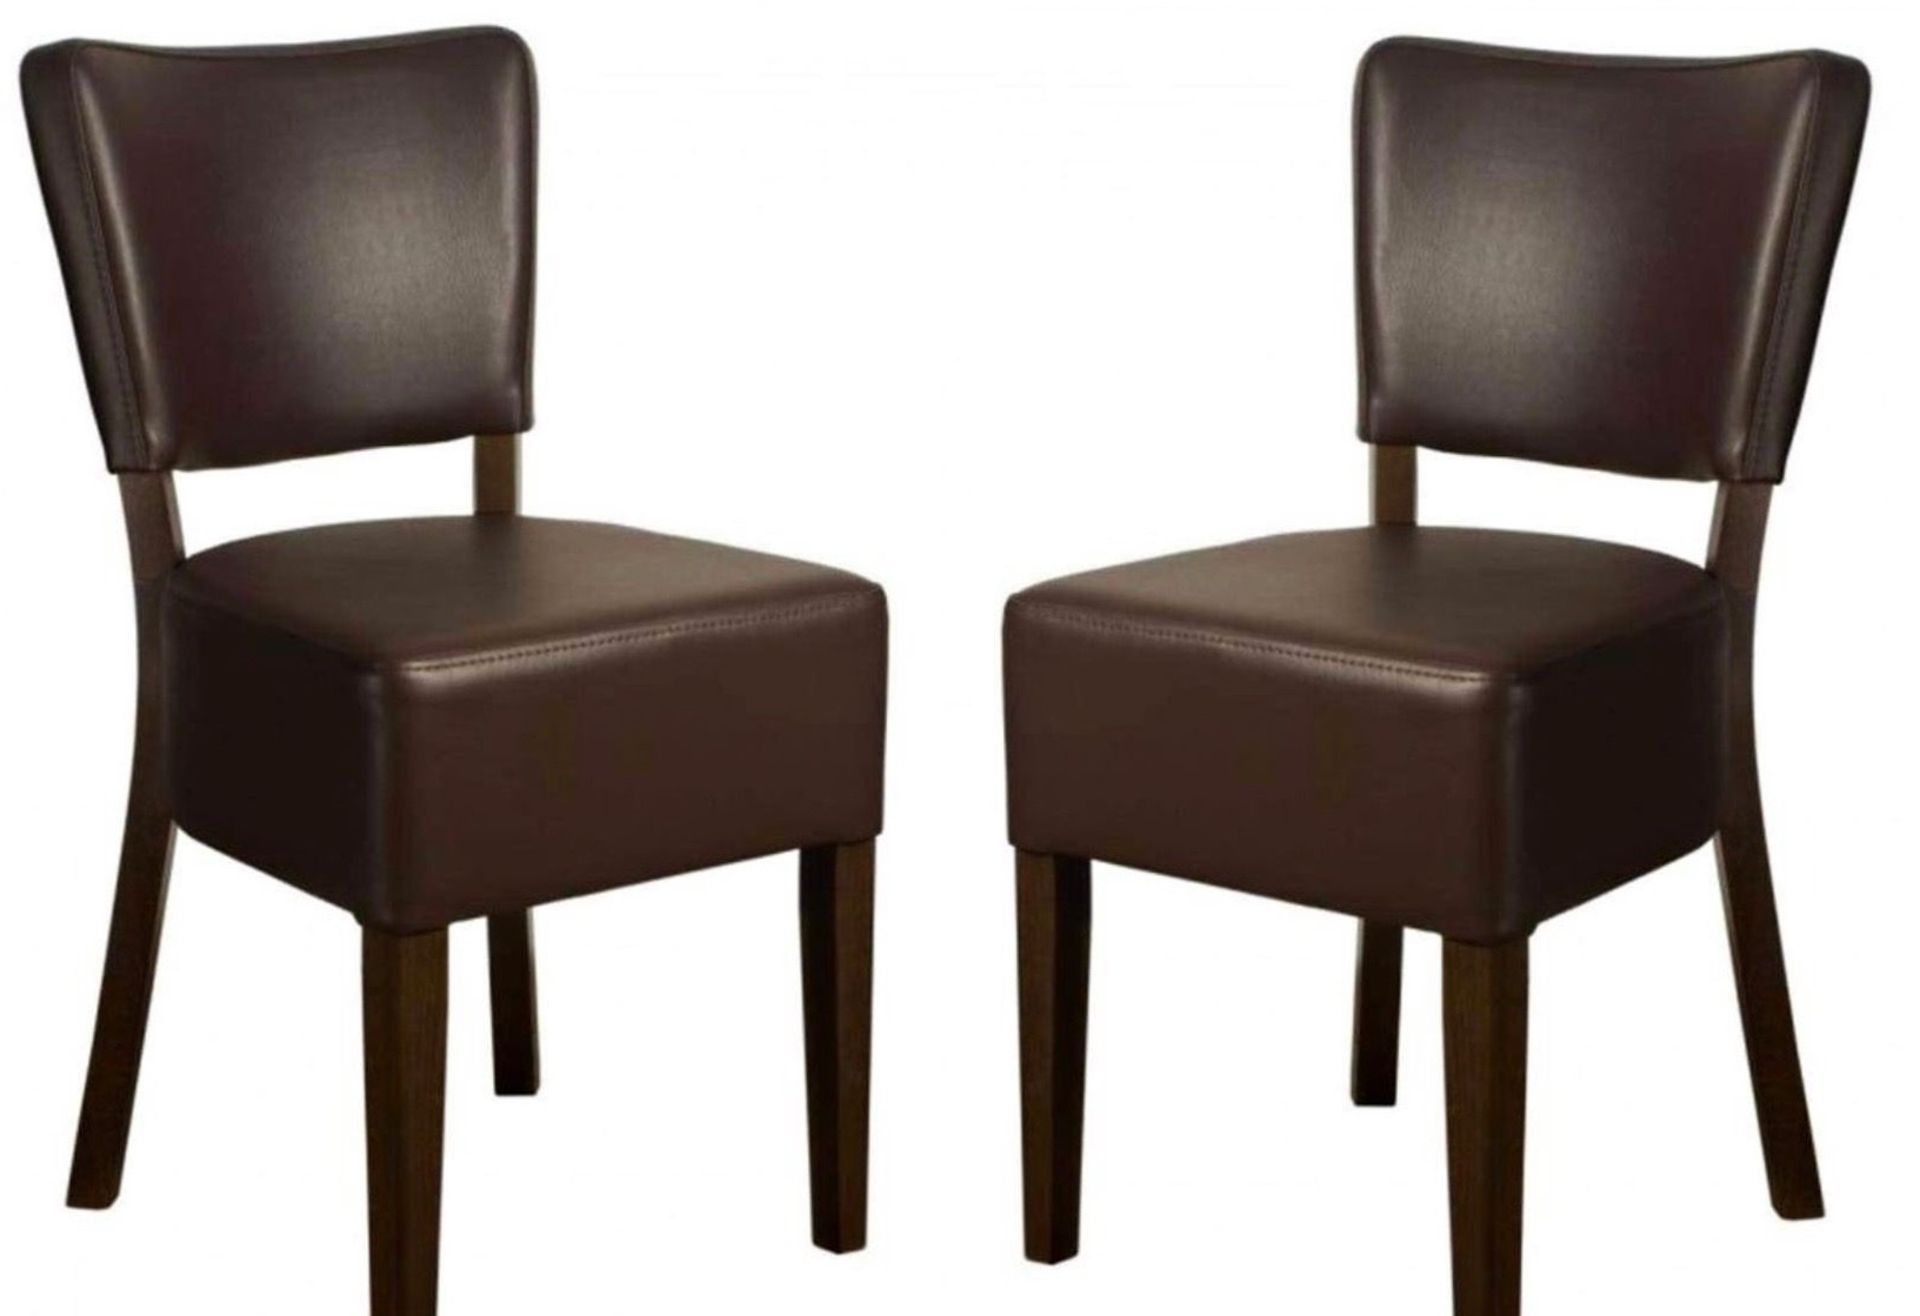 4 x Dining Chairs Upholstered in Black Faux Leather - New and Unused Stock - CL915 - Location: